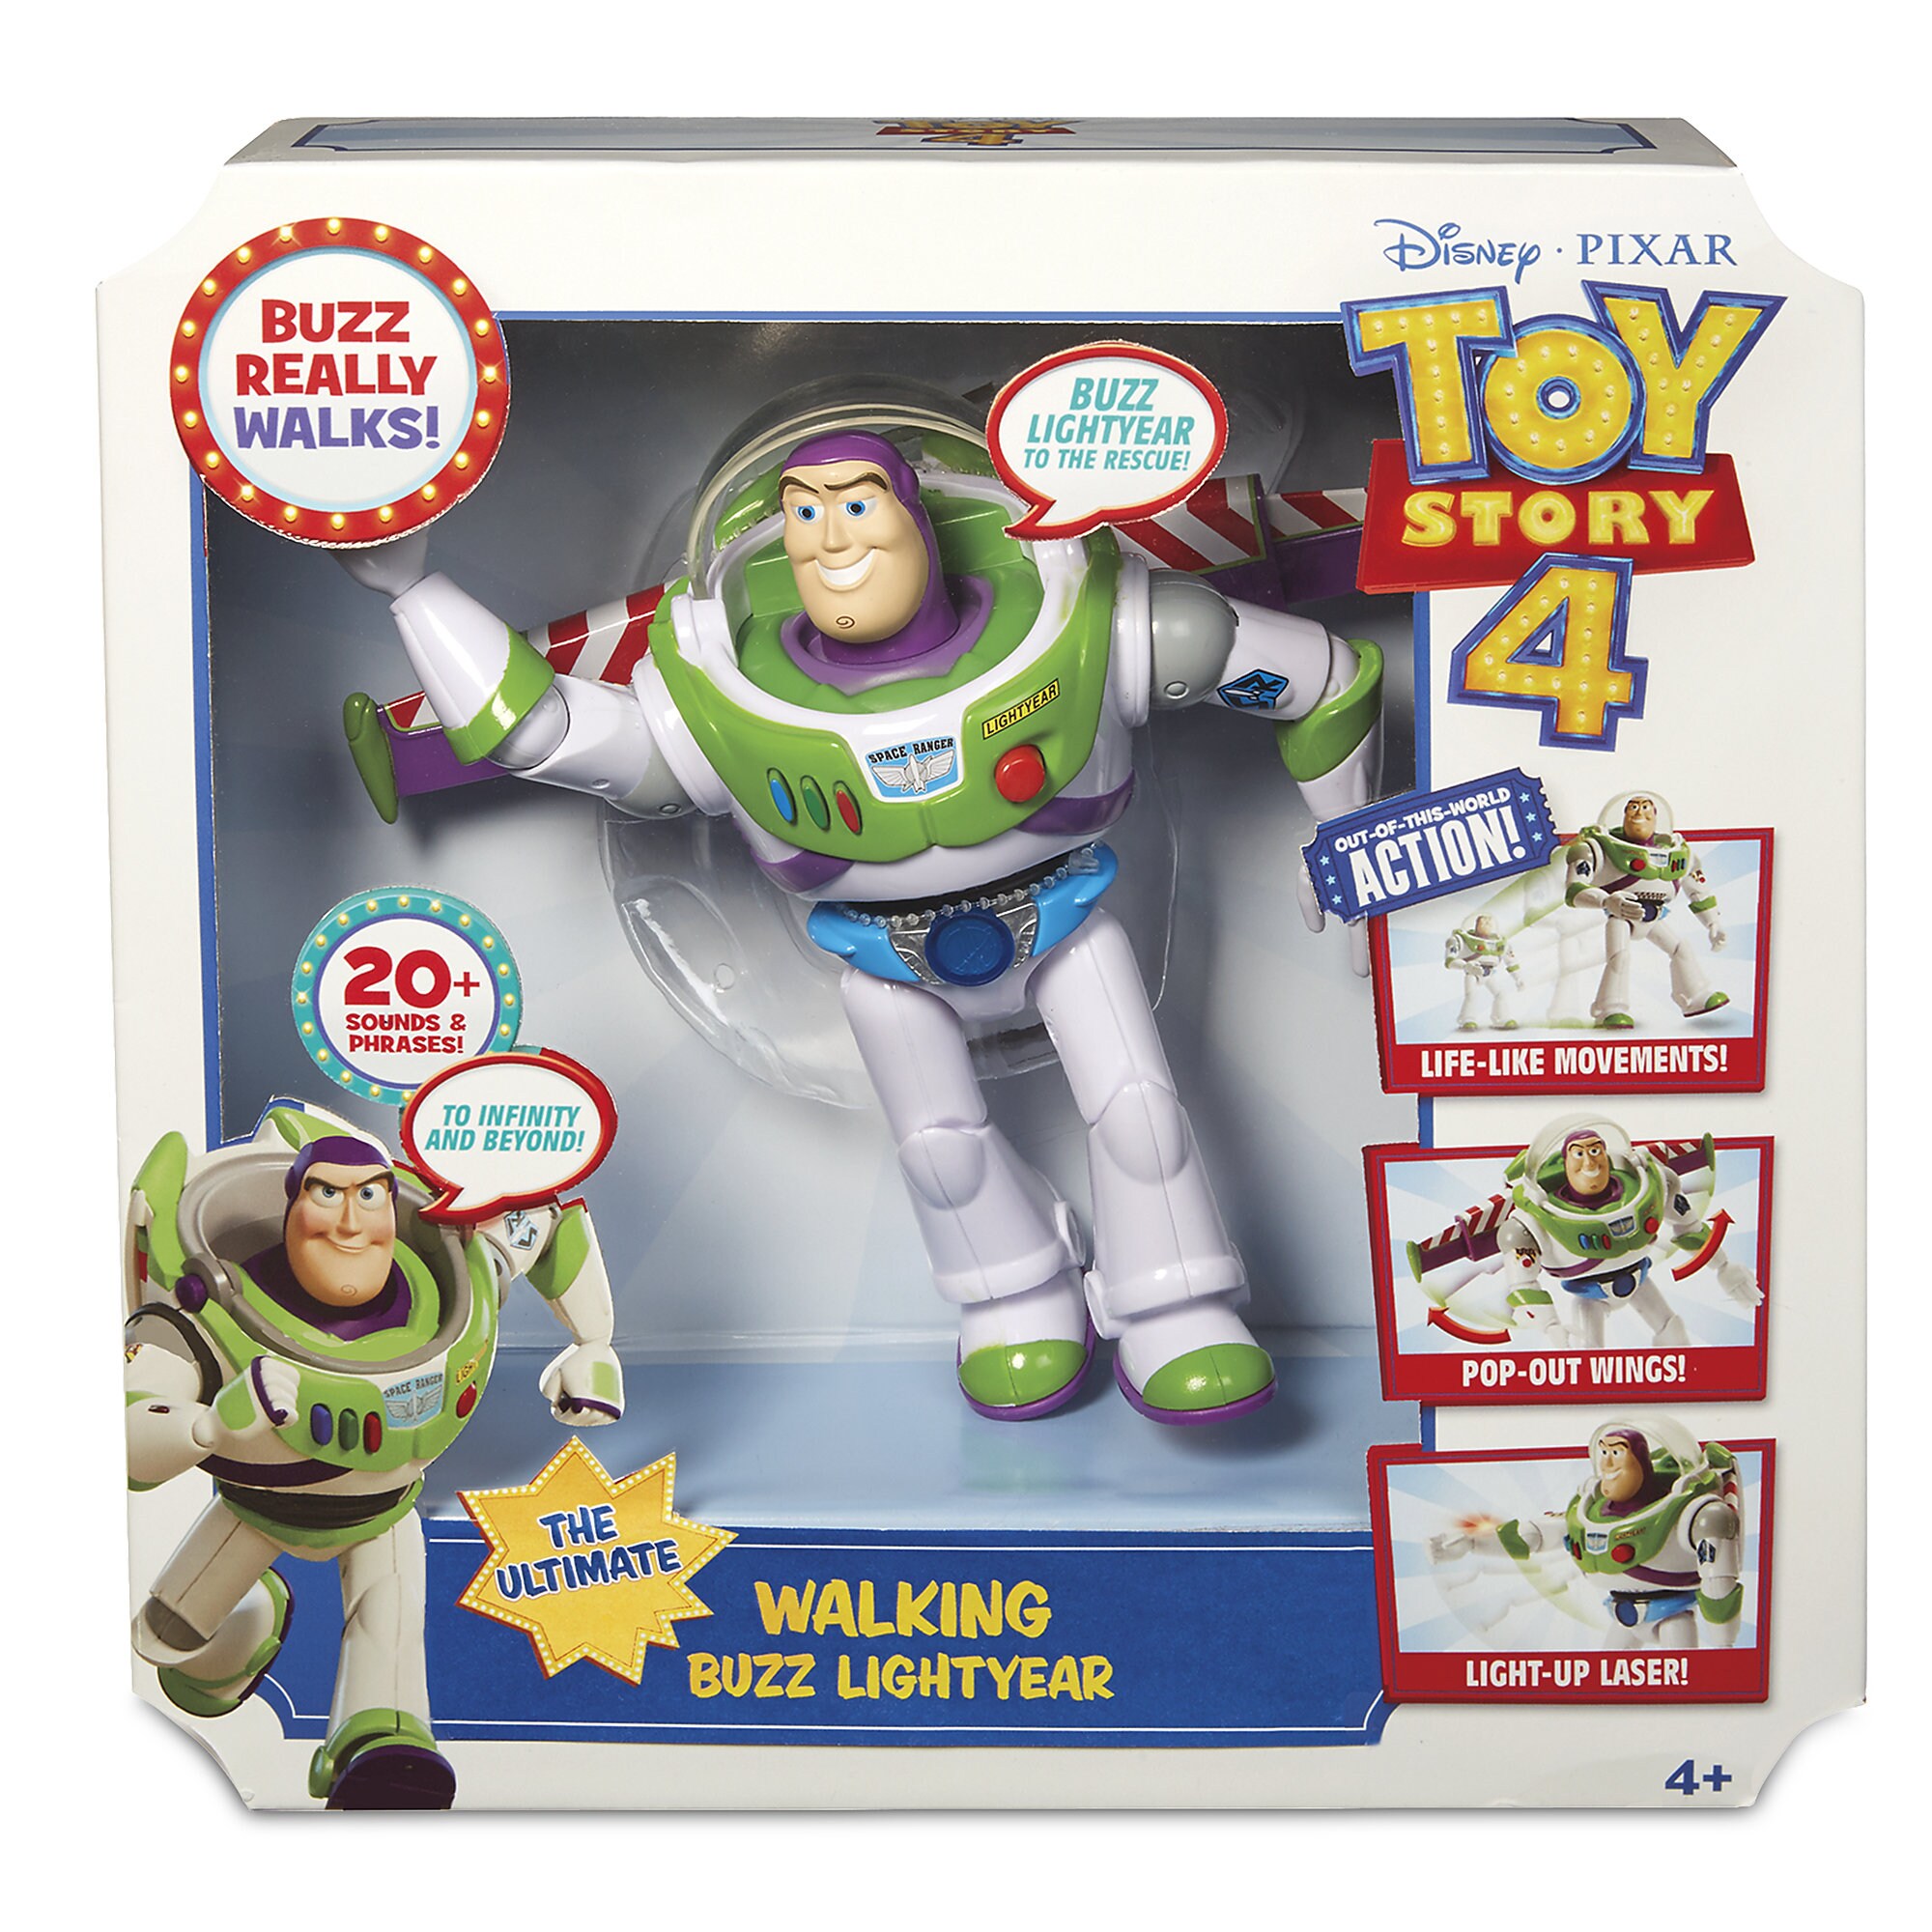 Buzz Lightyear Ultimate Action Figure – 7'' – Toy Story 4 is now out for purchase